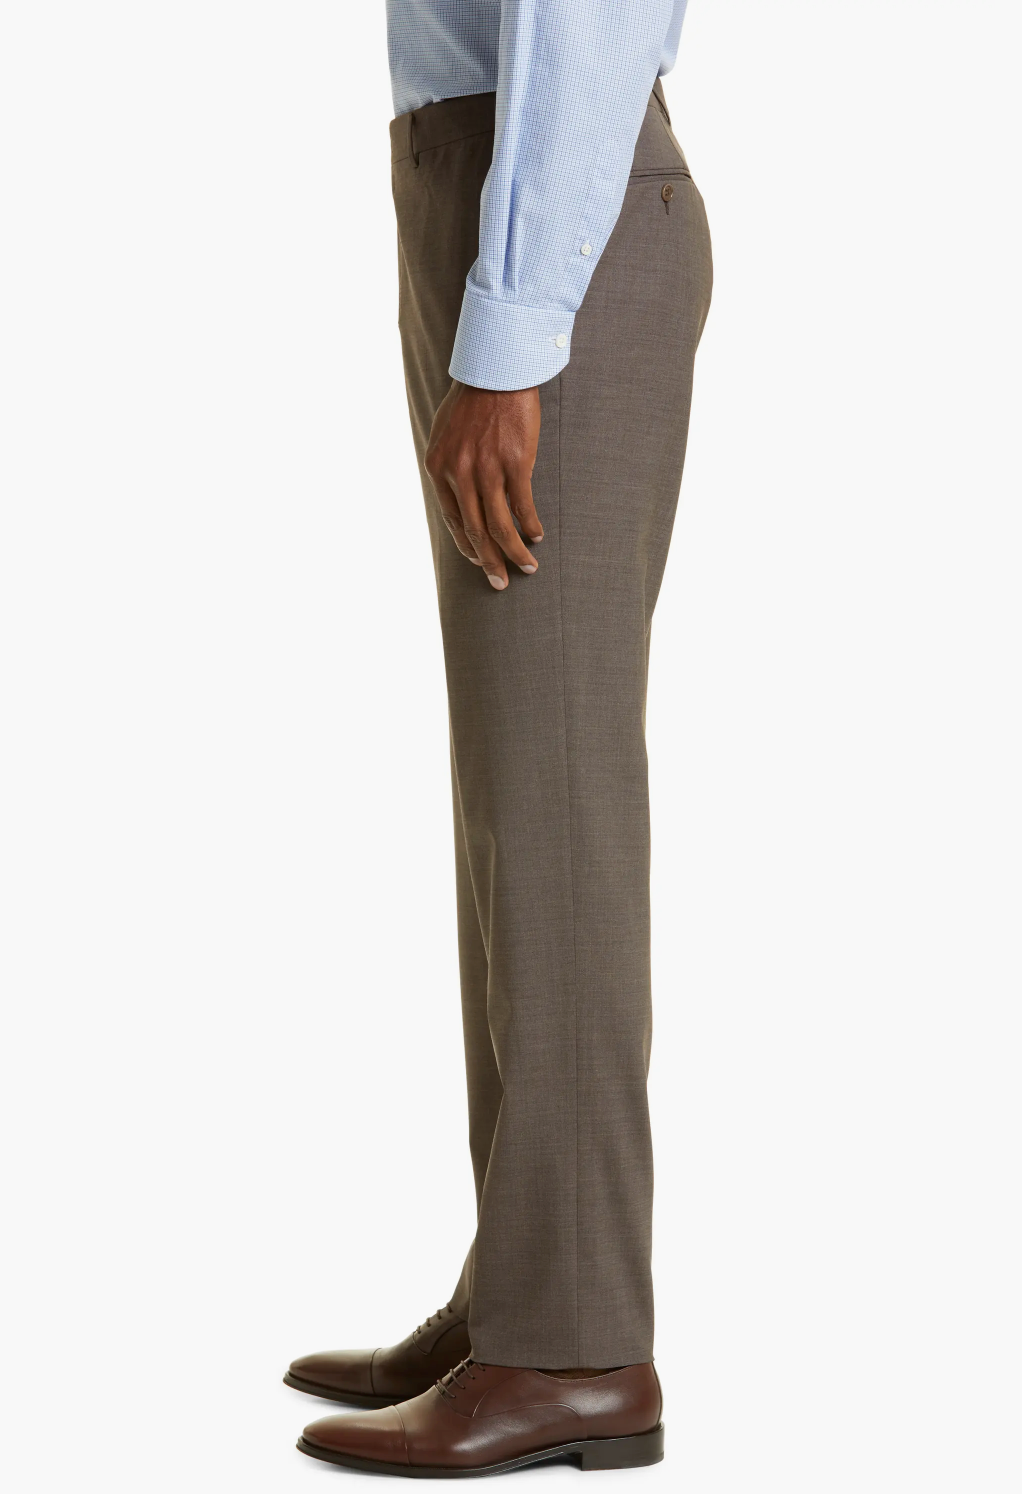 Canali Siena Classic Fit Super 130's Wool Dress Pants in Chocolate Brown